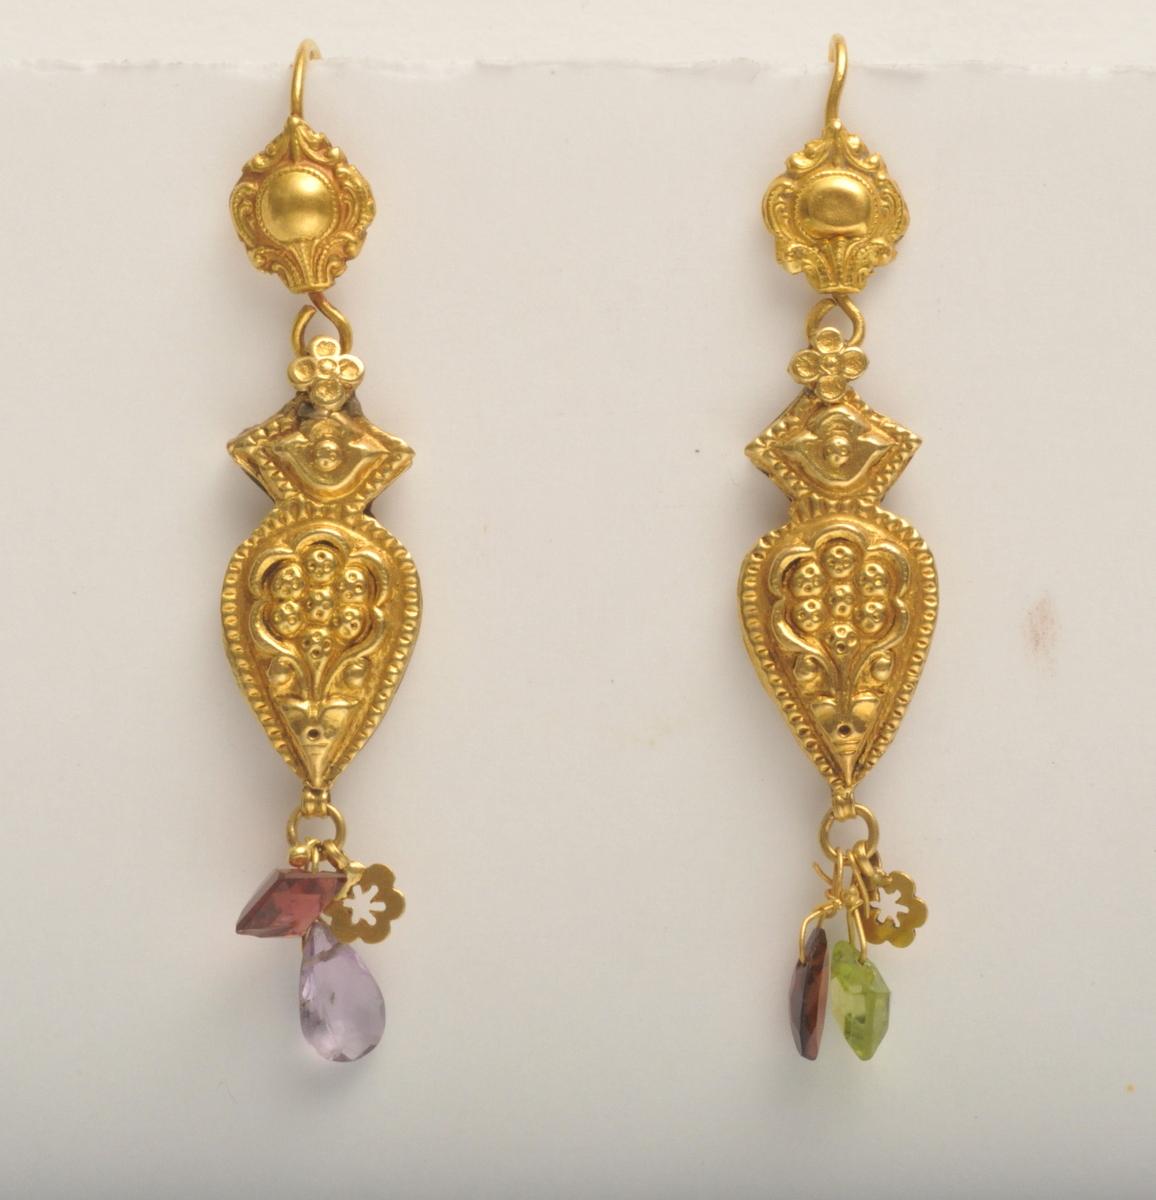 Lovely 22K gold drop earrings with fine granulation work and embossed details.  Hanging from the bottom are gold pendants and faceted semi-precious....garnet, peridot, amethyst.  French wire earring backs for pierced ears.